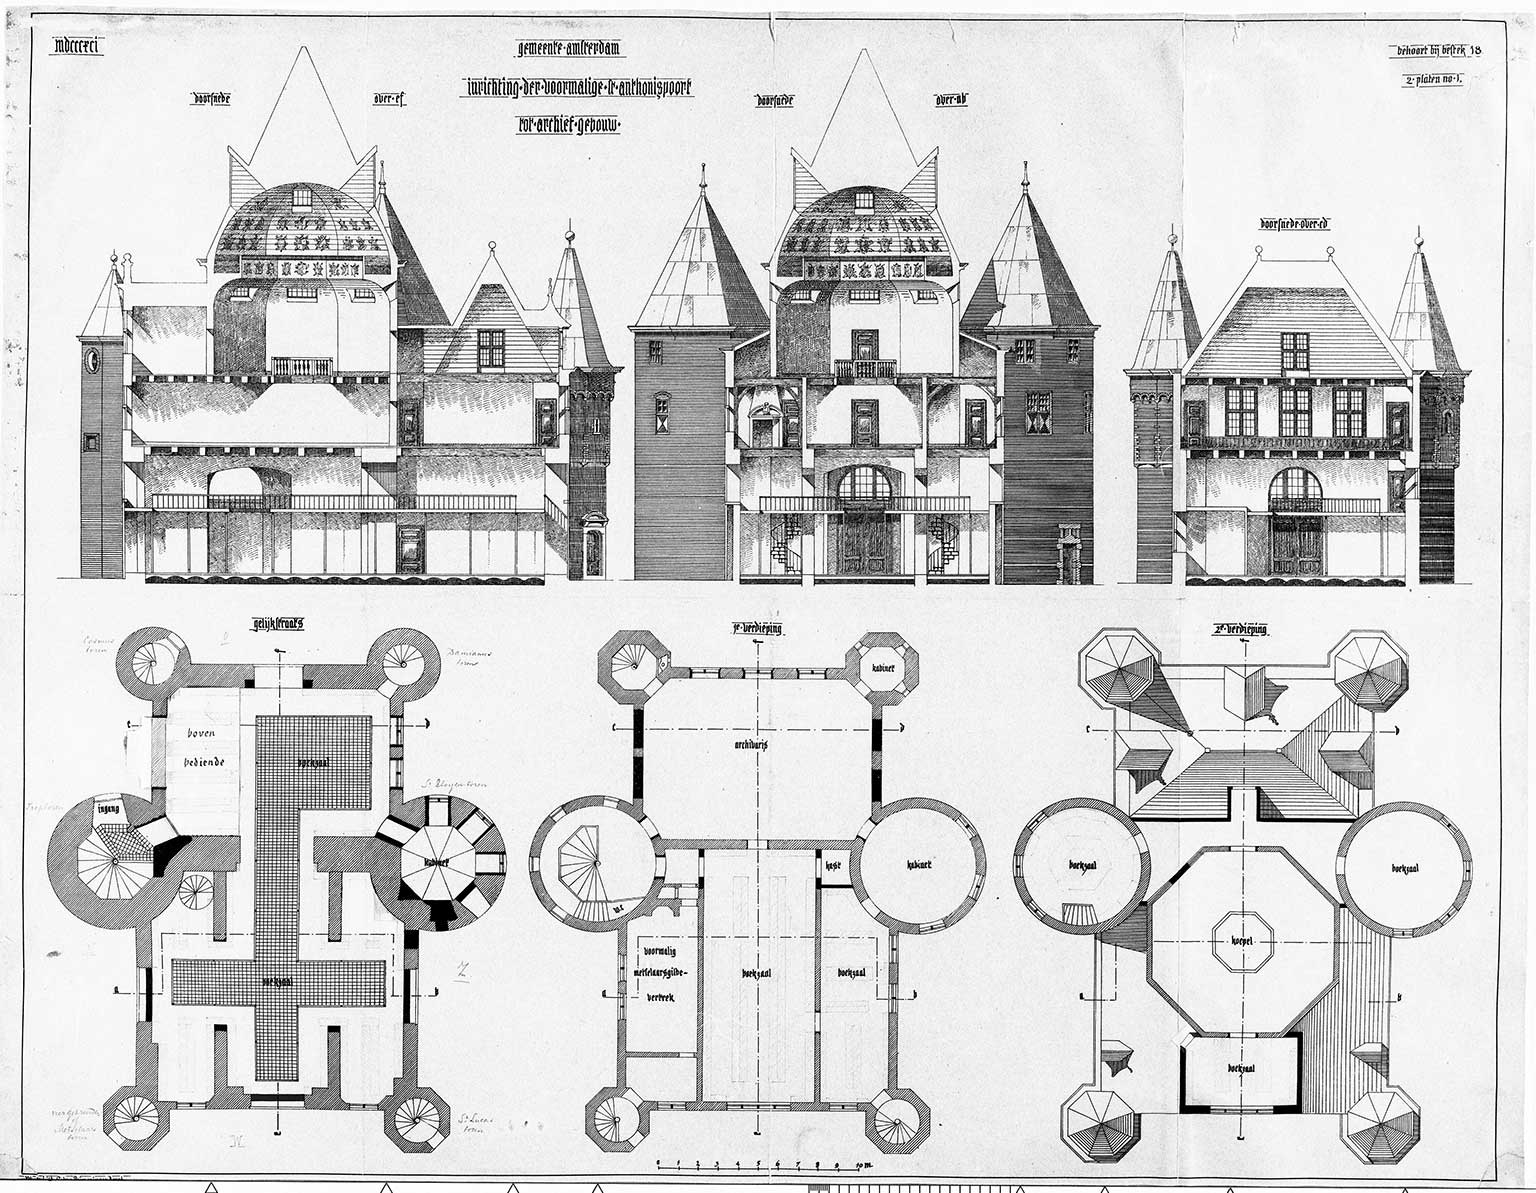 Building plan and cross-section of the Waag, Amsterdam, from 1892